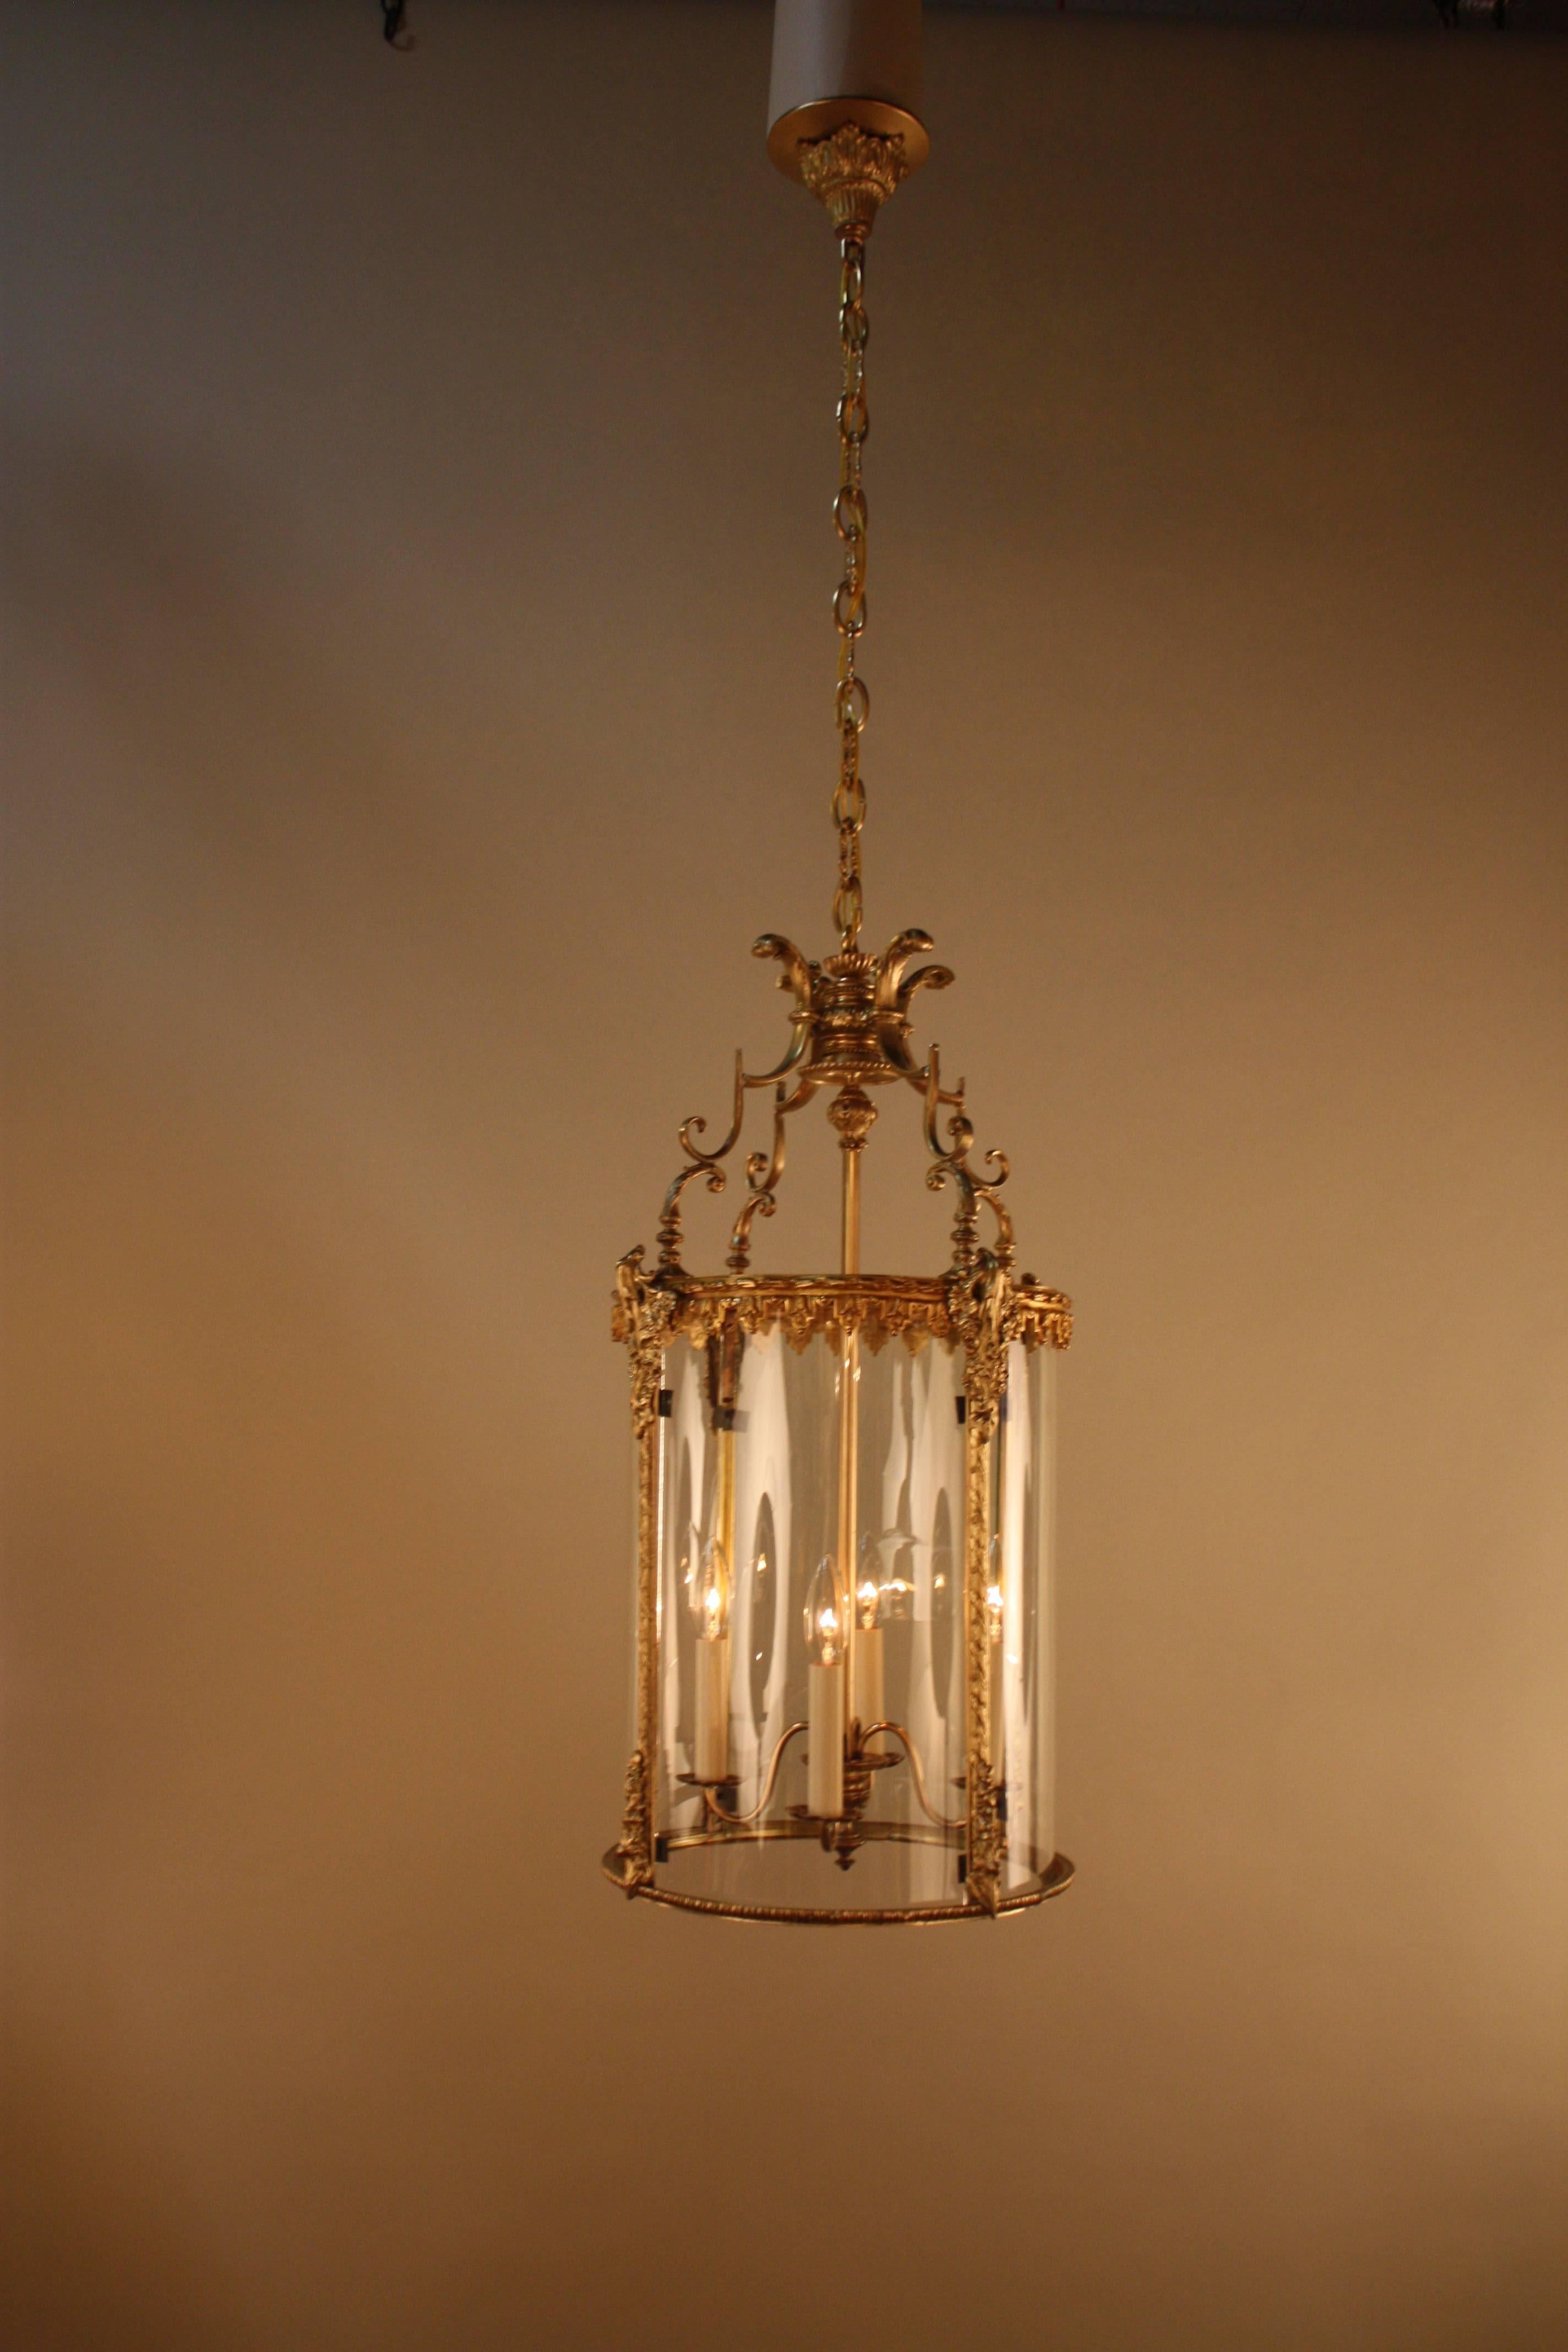 A Fabulous 1920's four light French bronze lantern.

Minimum height fully installed with 1 link of chain and canopy is 33".